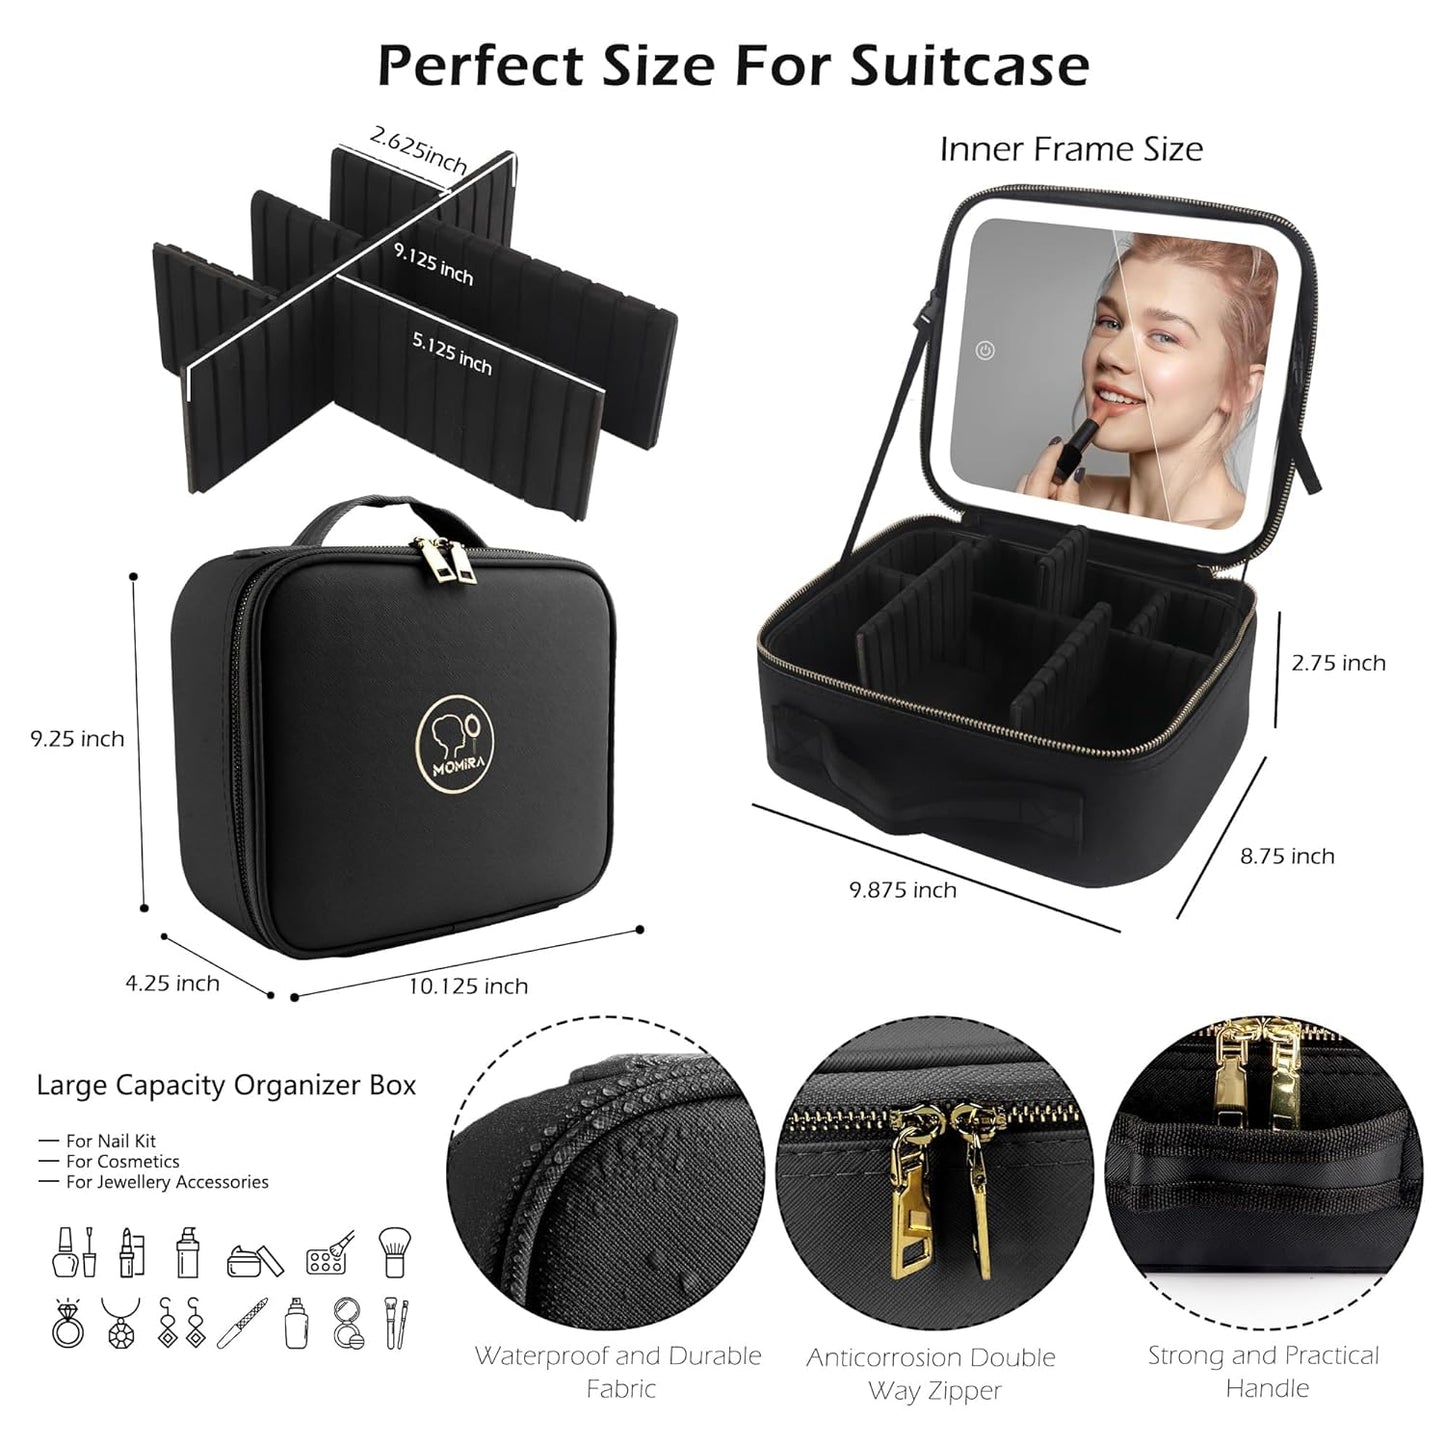 Makeup Bag with Mirror and Light Travel Makeup Train Case Cosmetic Organizer Portable Artist Storage Bag with Adjustable Dividers Makeup Brushes Storage Organizer